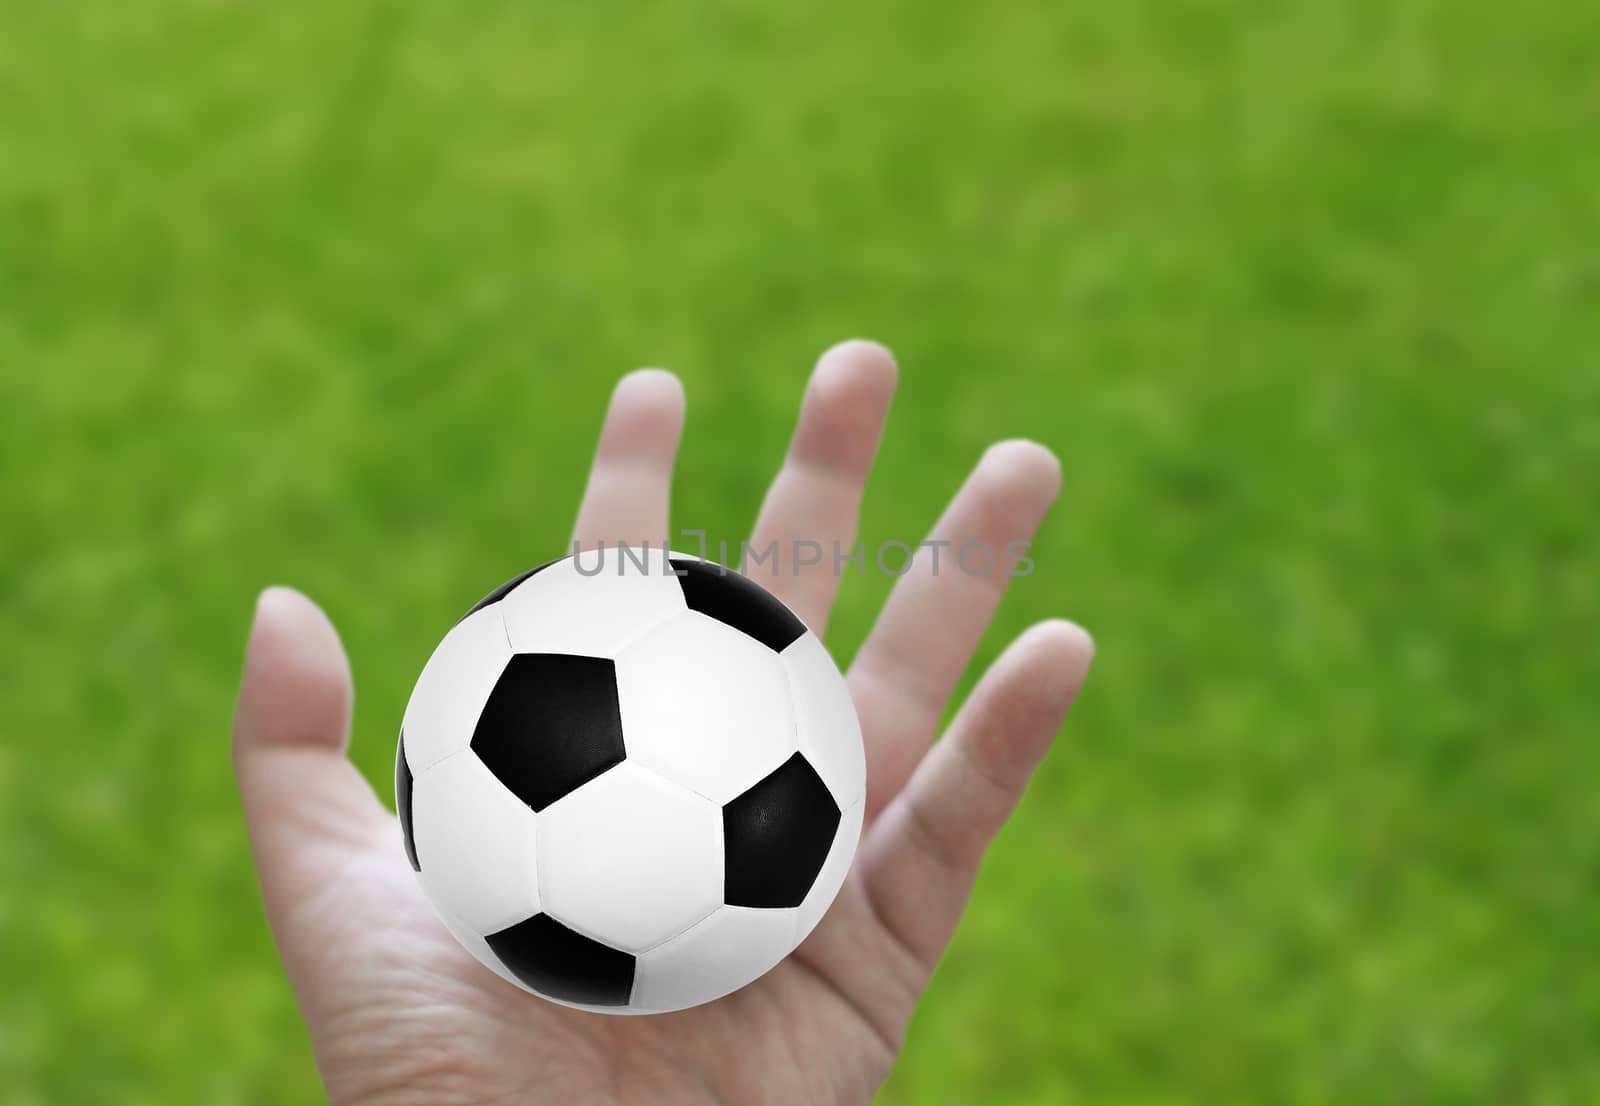 Football in hand with grass background